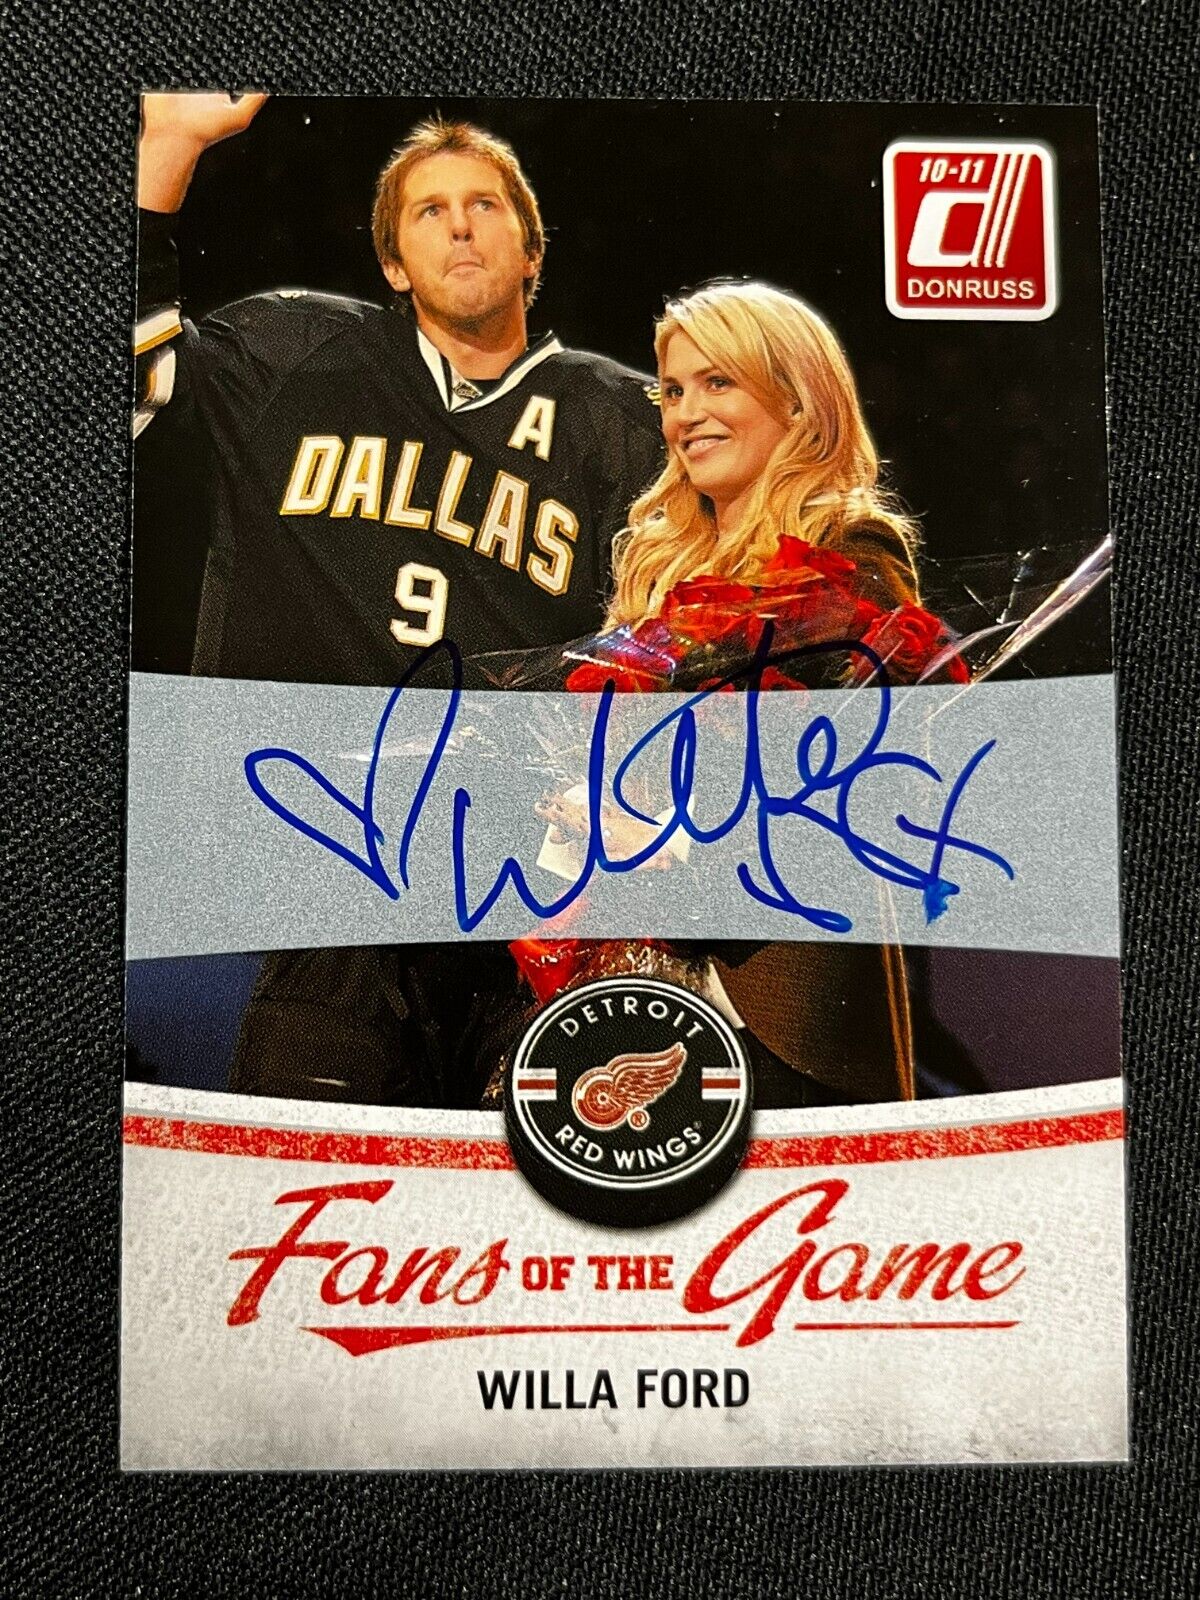 2010-11 Donruss Fans of the Game Willa Ford 5 autograph card #RD 350/400 AA